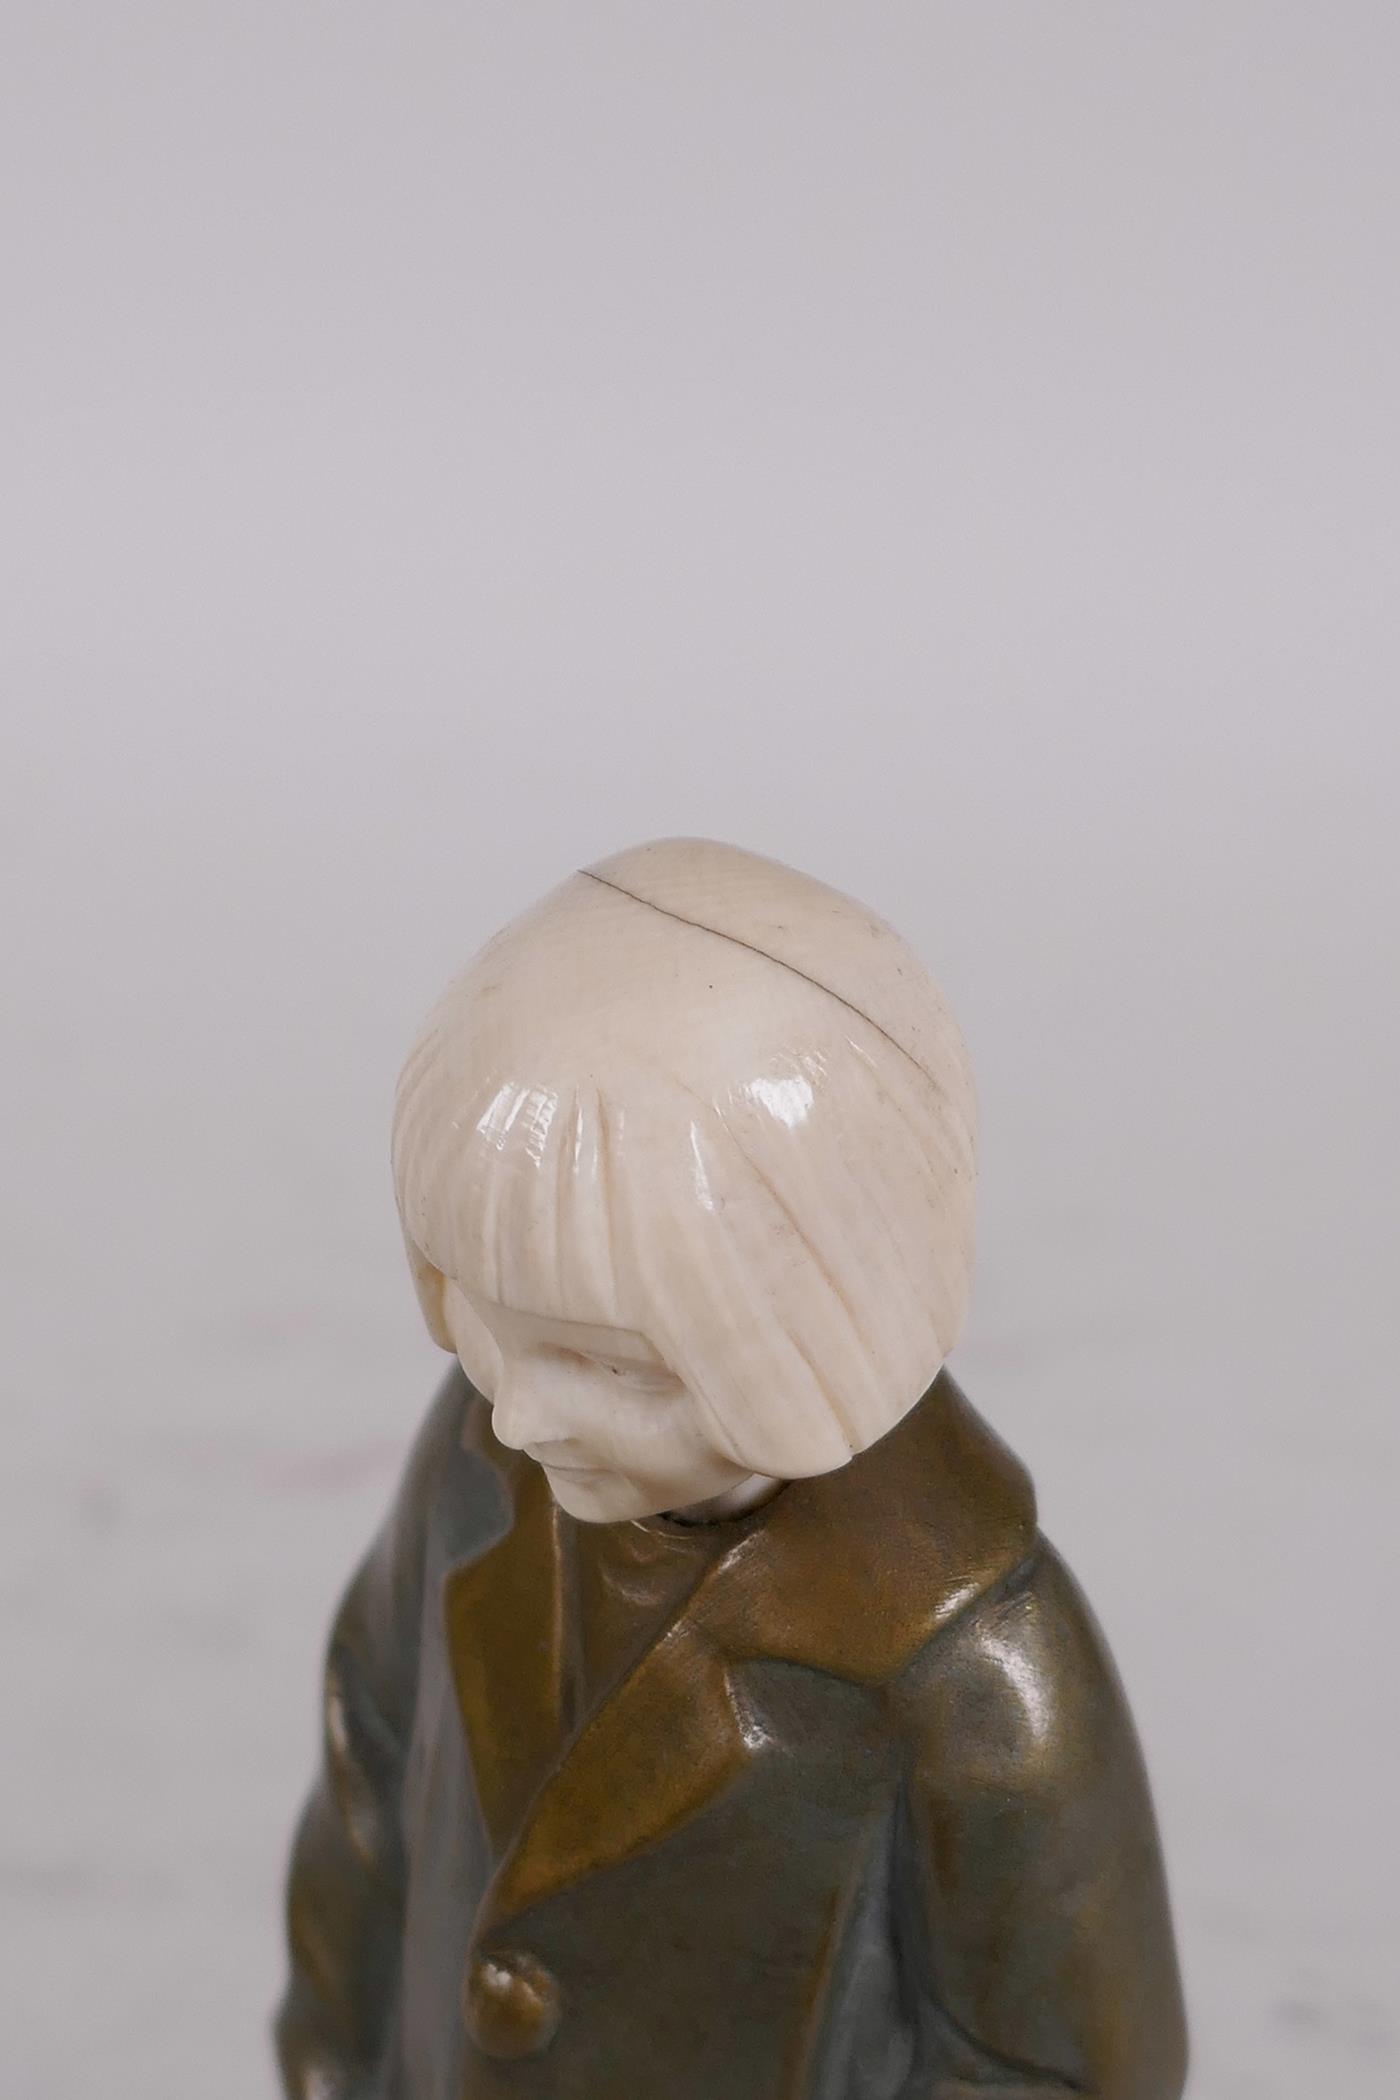 Soulange Bertrand (1913-2011), bronze figure of a young girl, mounted on a marble base, 7" high - Image 4 of 5